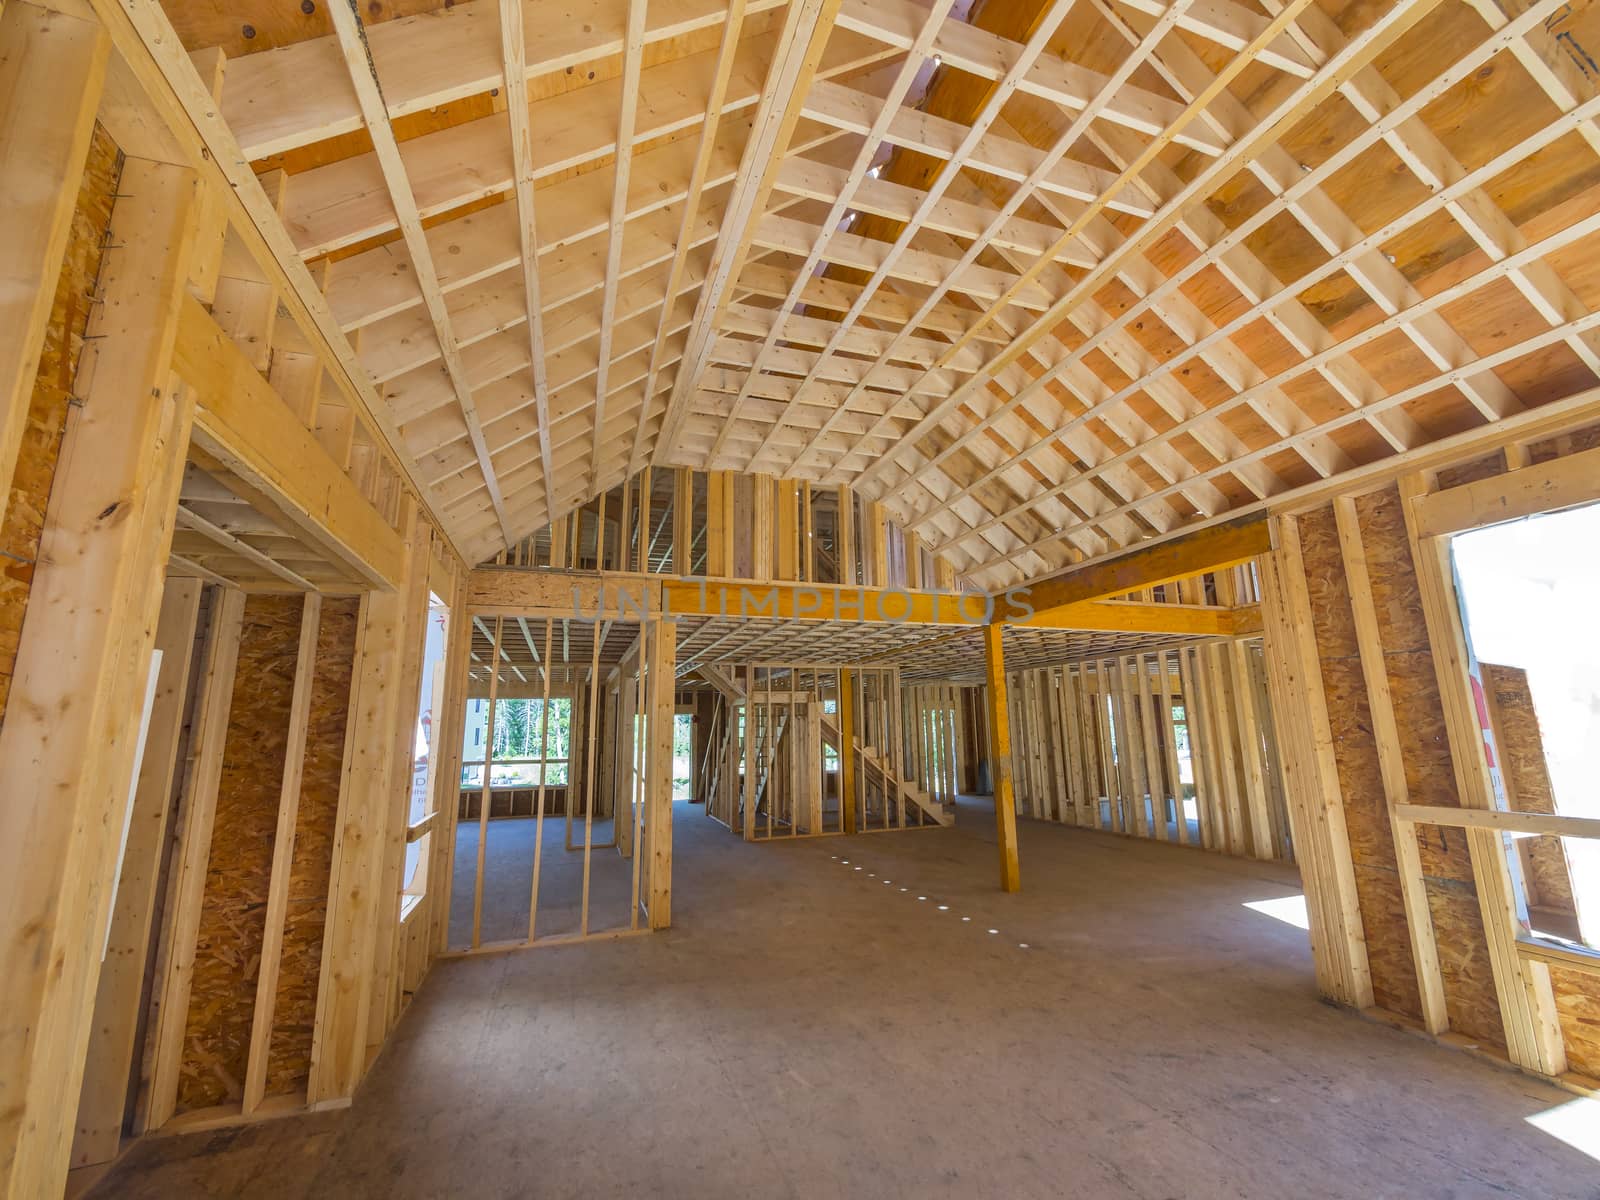 Interior framing of a new house under construction